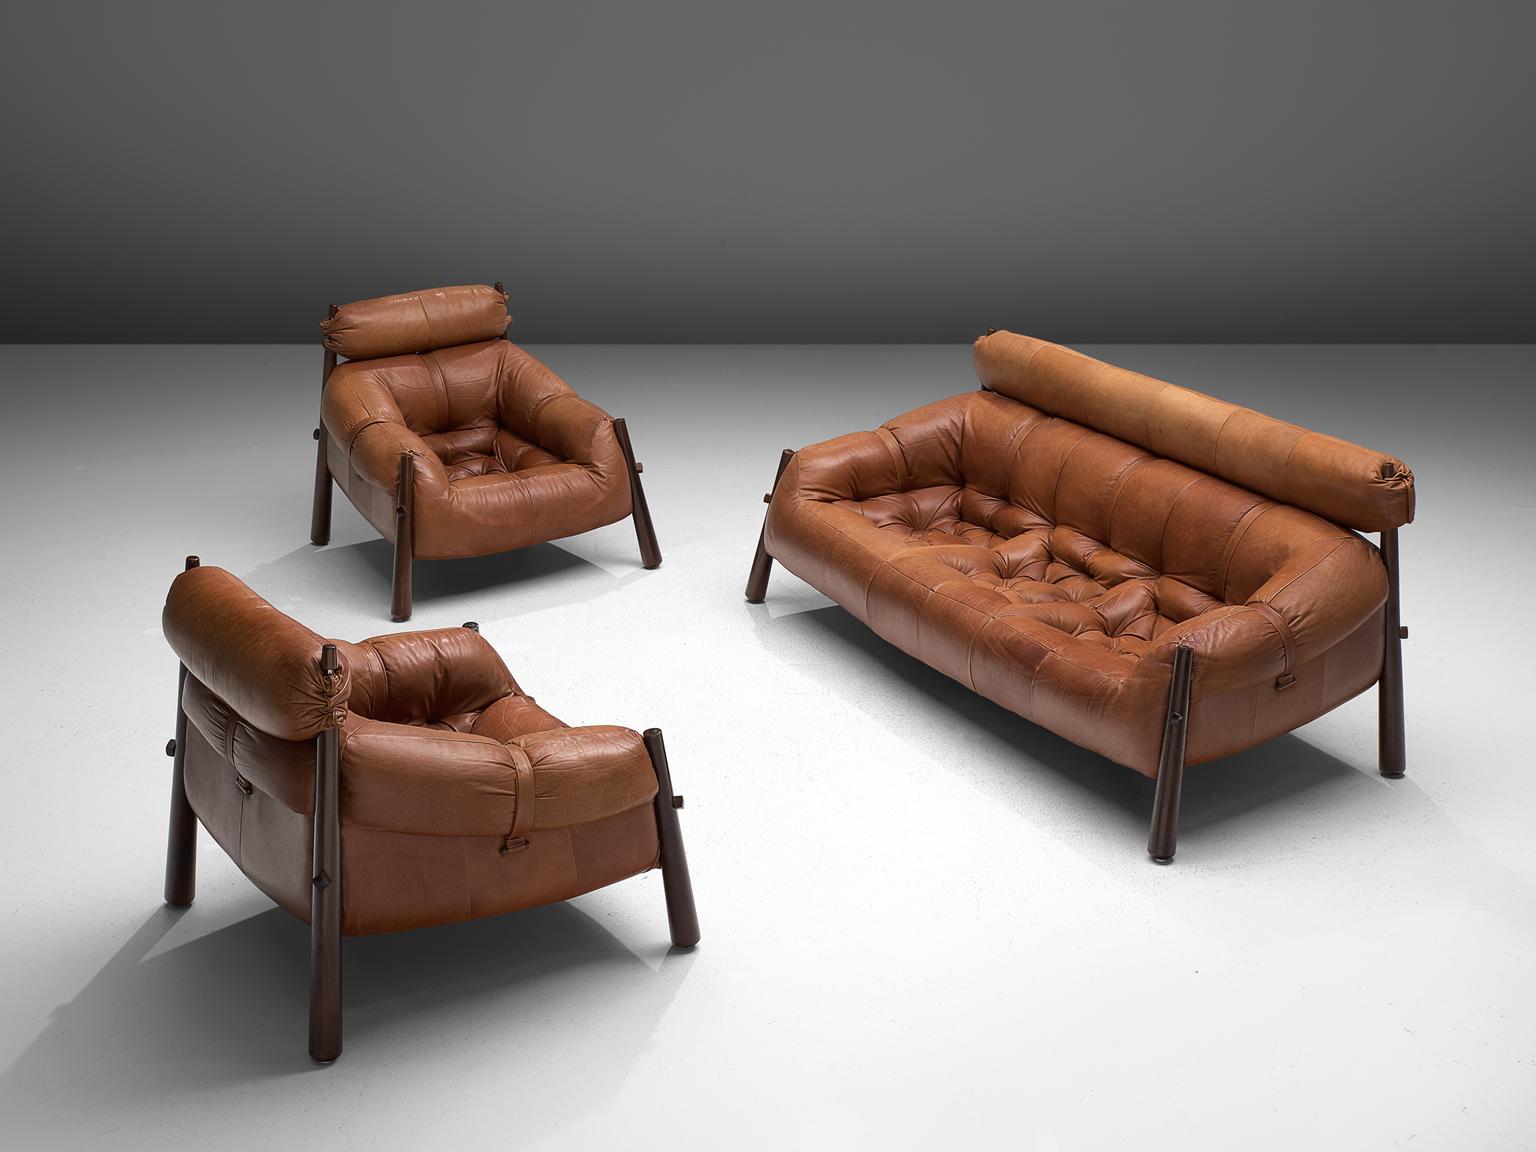 Percival Lafer, living room set model MP-81, in rosewood and leather, Brazil, 1972.

Beautiful set of one sofa, two lounge chairs and an ottoman by Brazilian designer Percival Lafer. Every piece consist of a solid dark wooden base to which the